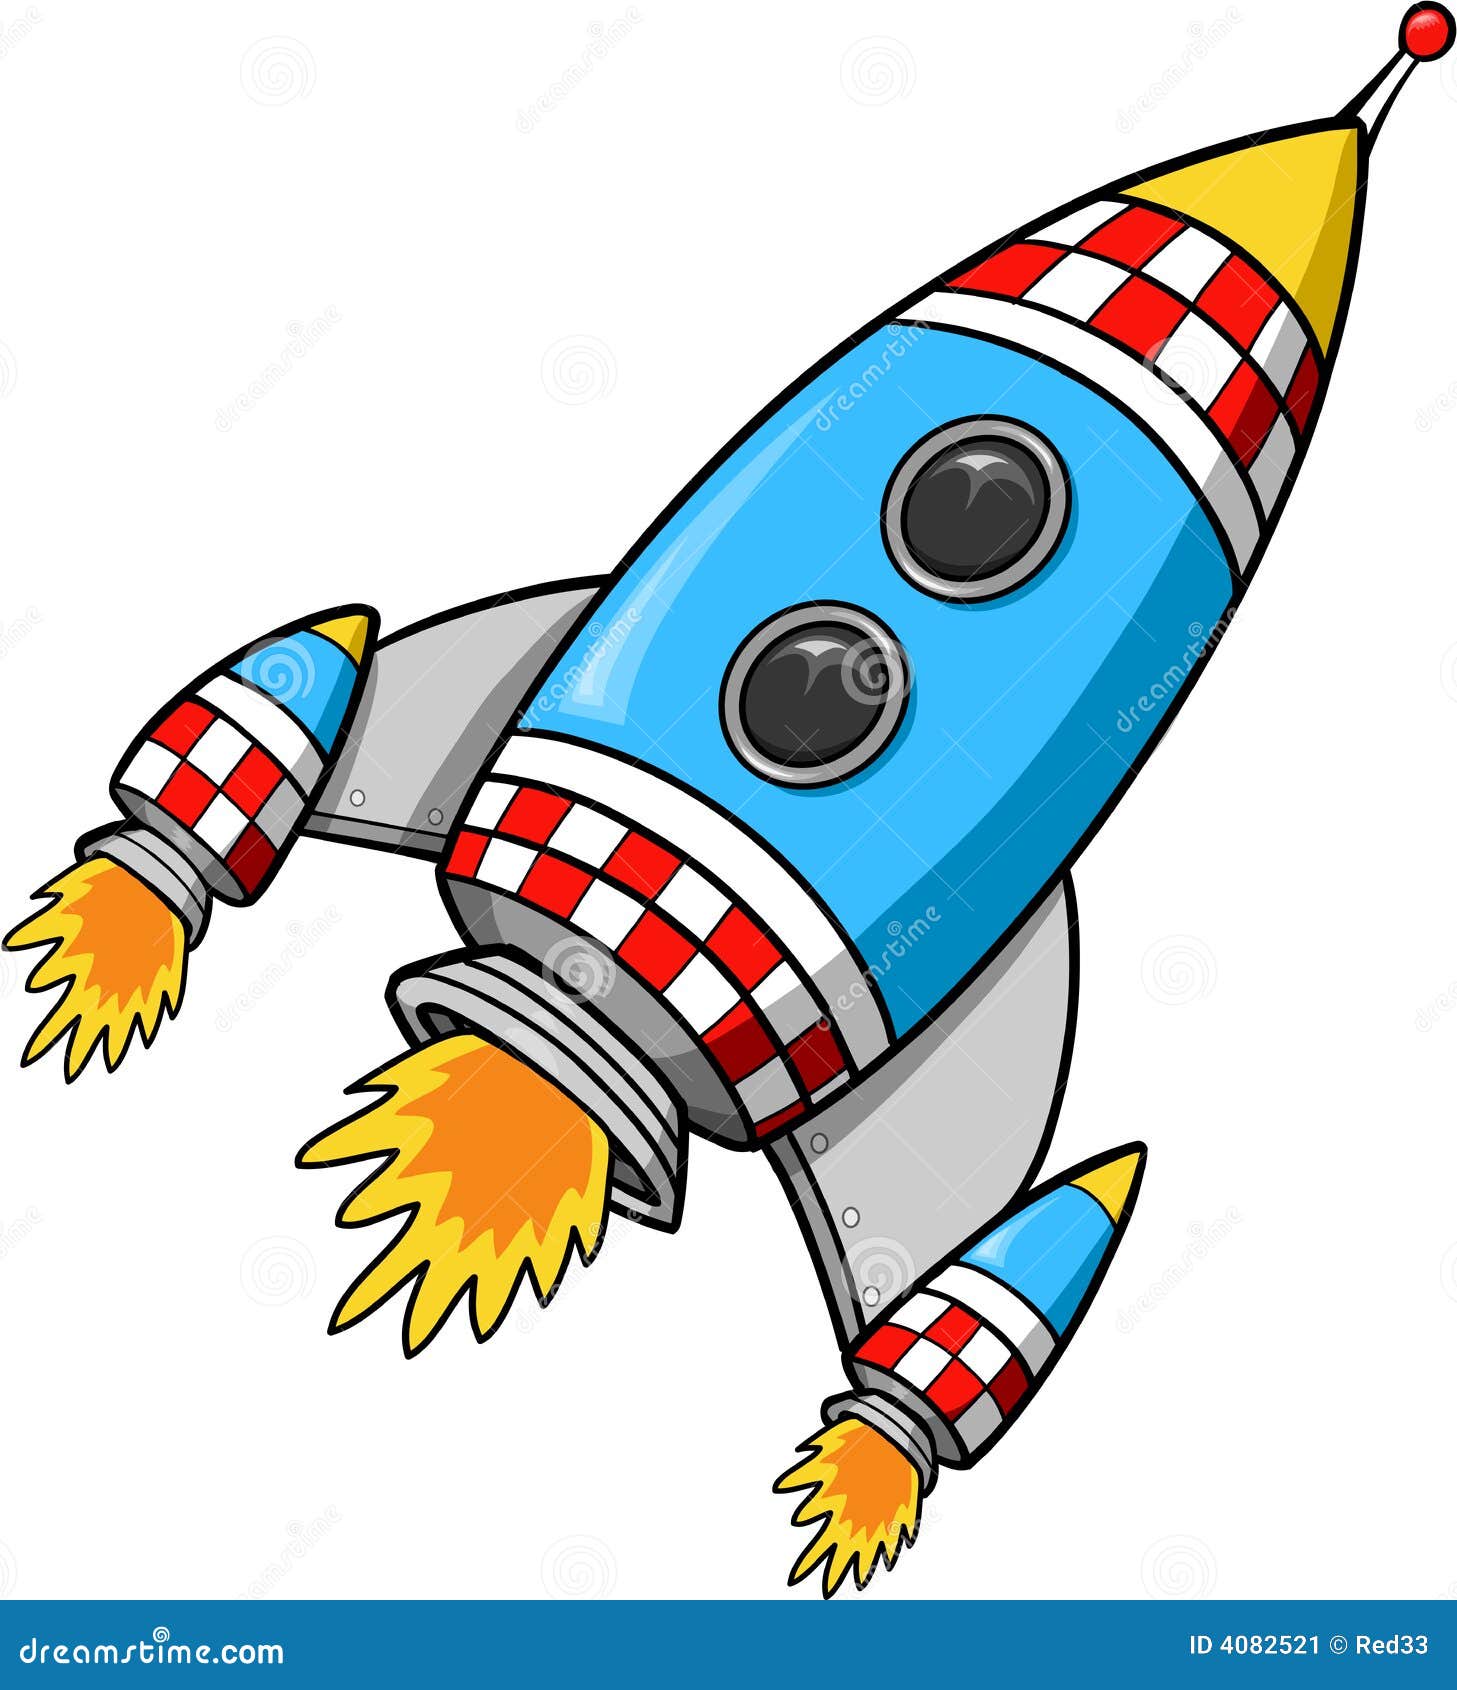 space travel clipart - photo #2